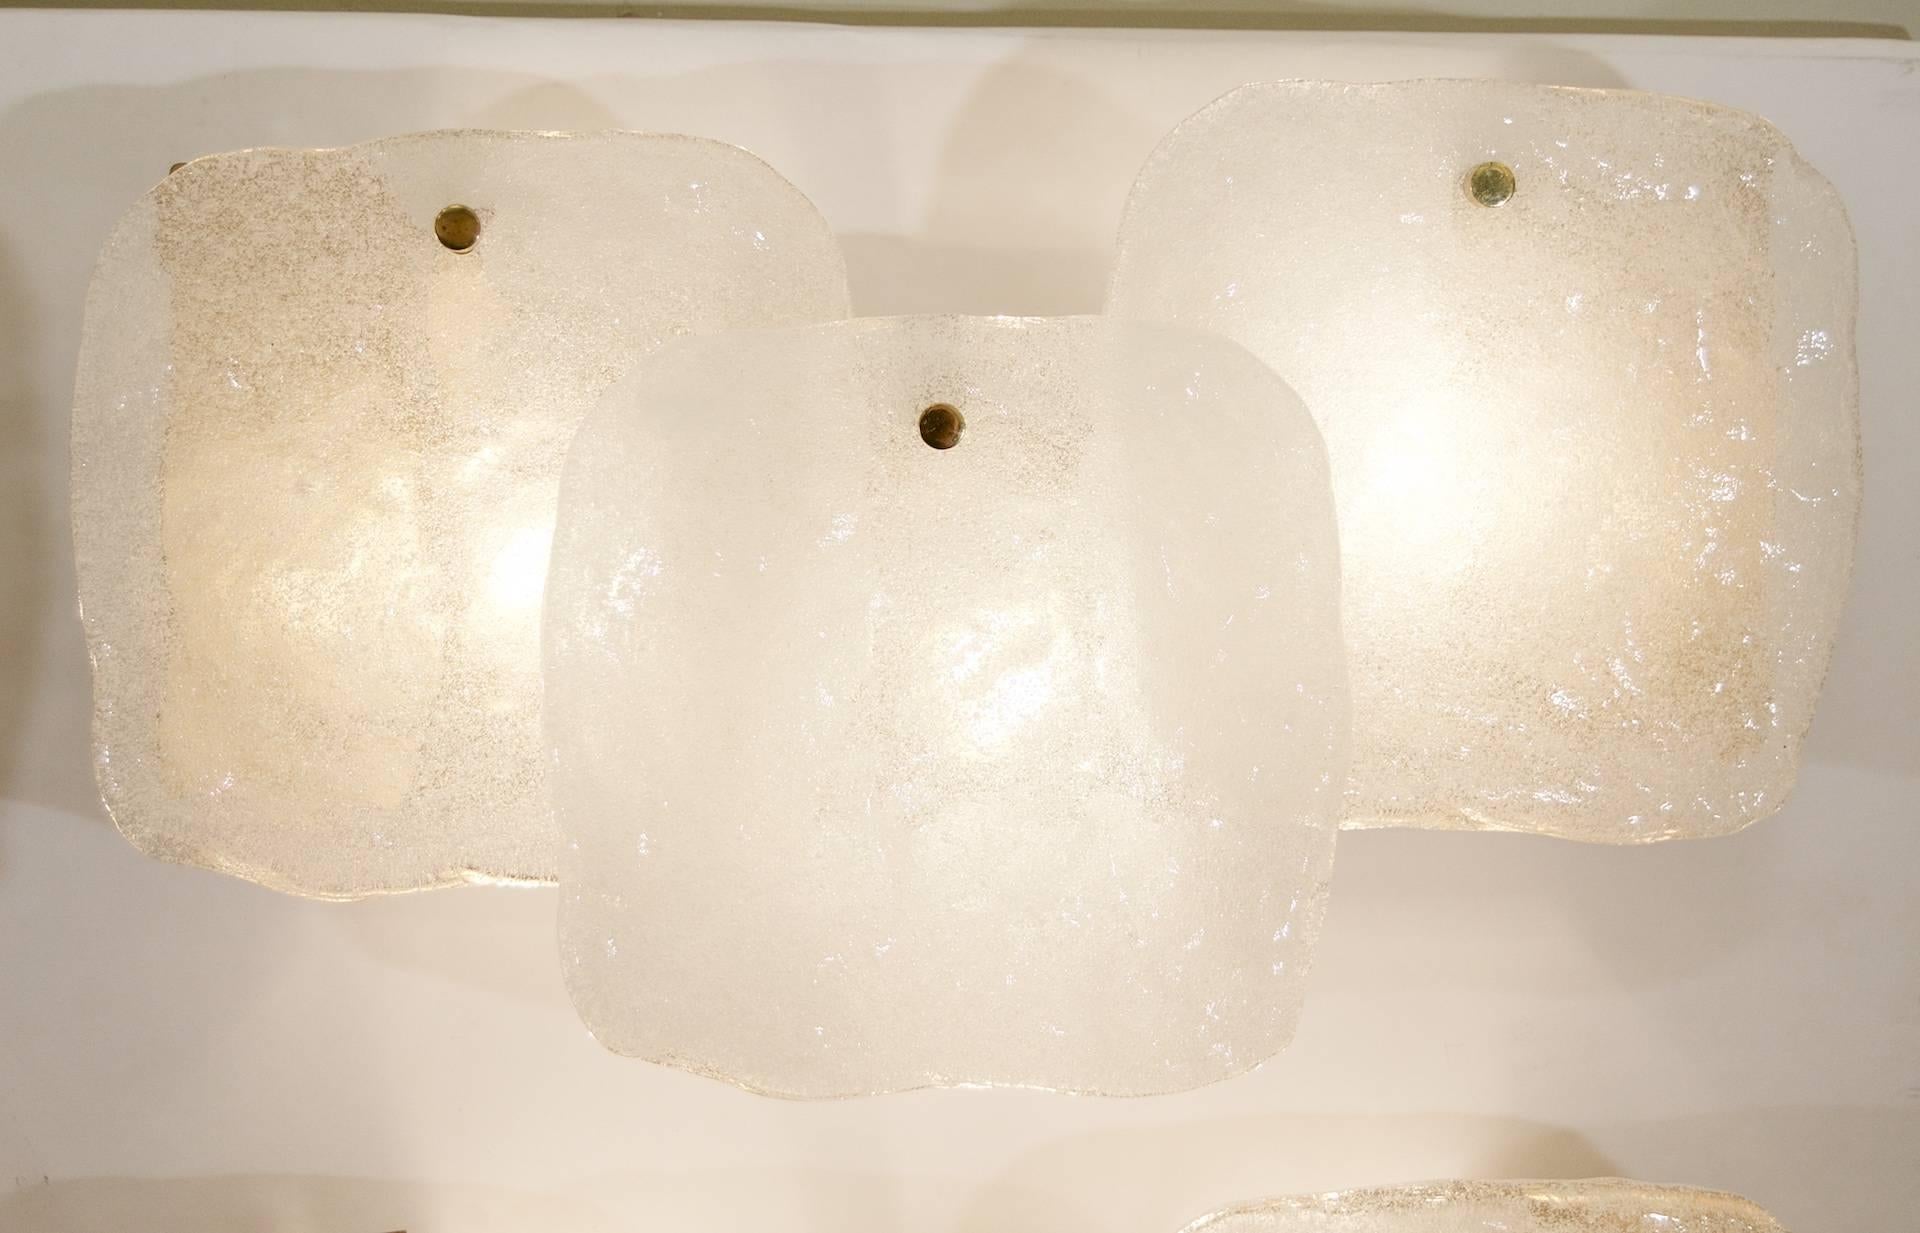 An excellent pair of large Kalmar wall sconces, each having three large pieces of ice block glass hung in a staggered fashion from a gold tone enameled backplate.

Three E-14 base bulb up to 40 watts per sconce, new wiring.

Price listed is per